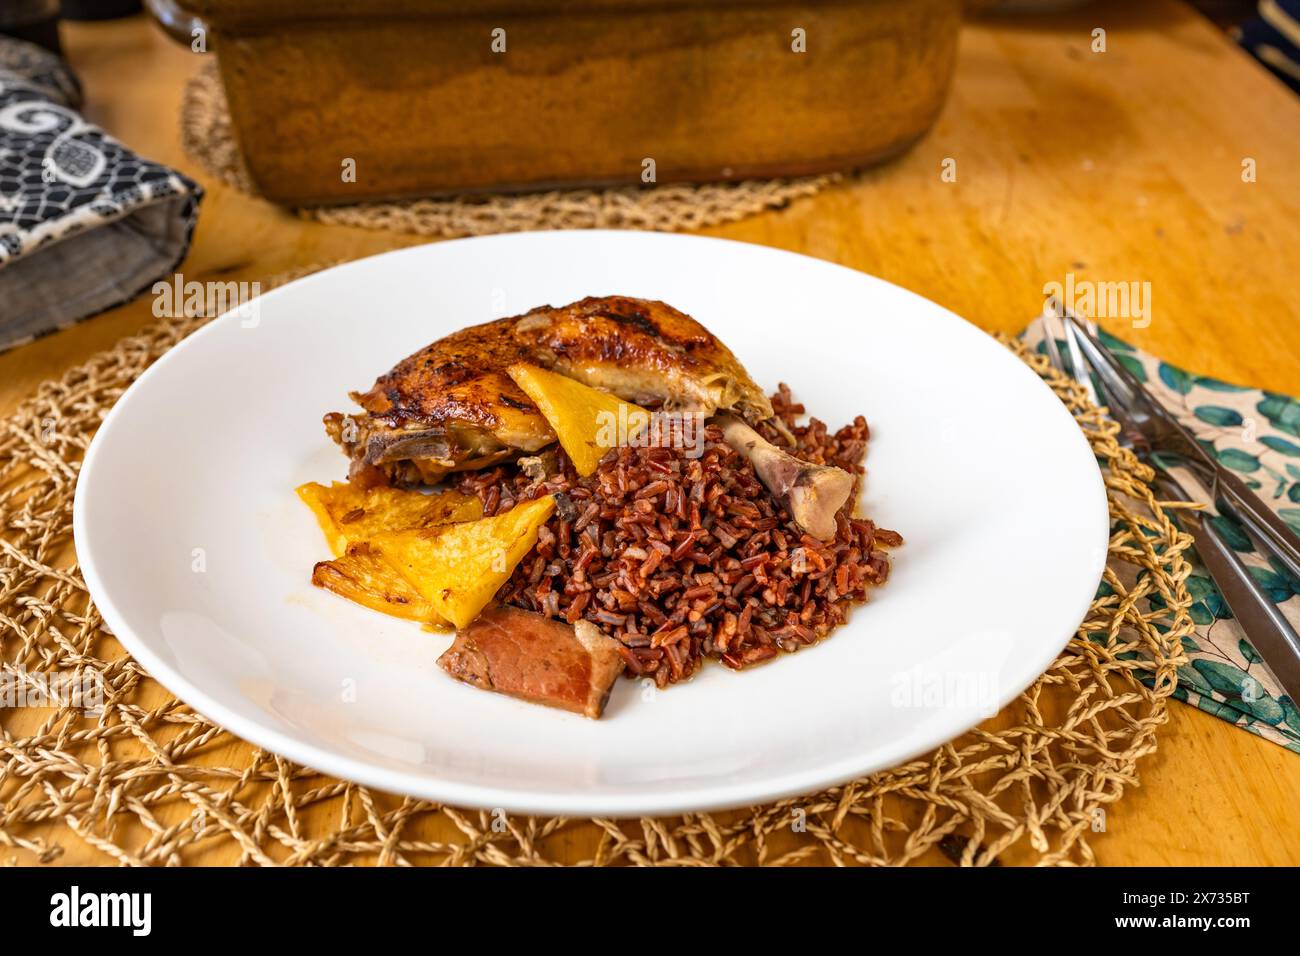 Baked chicken leg with red rice, pineapple pice and bacon on white plate, baking pan,cutlery and potholder on wooden table. Stock Photo